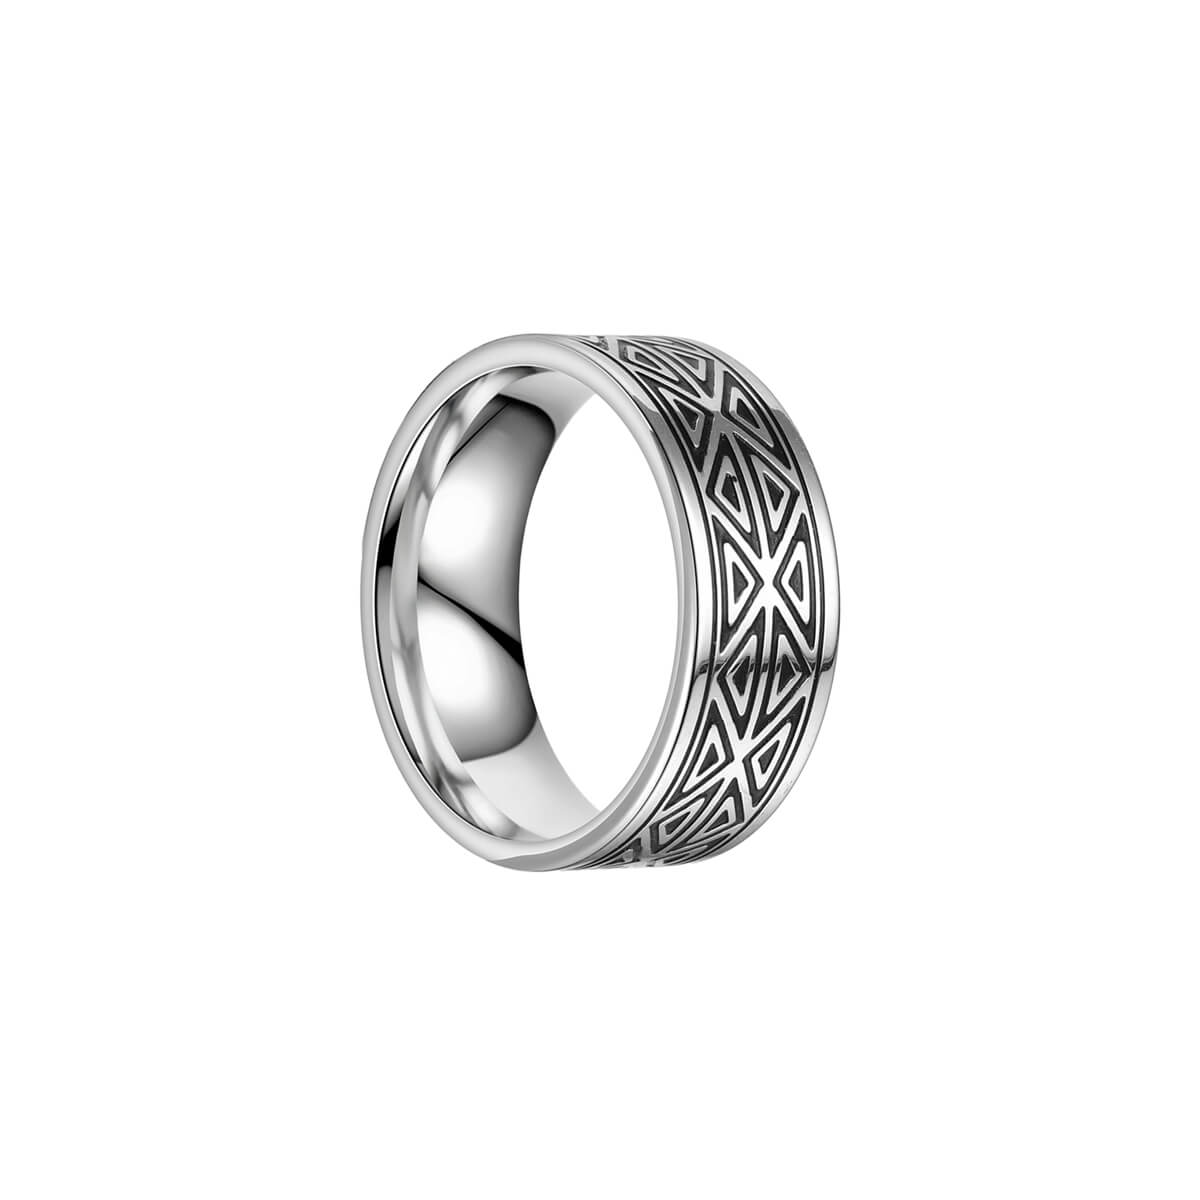 Triangle patterned polished steel ring 8mm (Steel 316L)